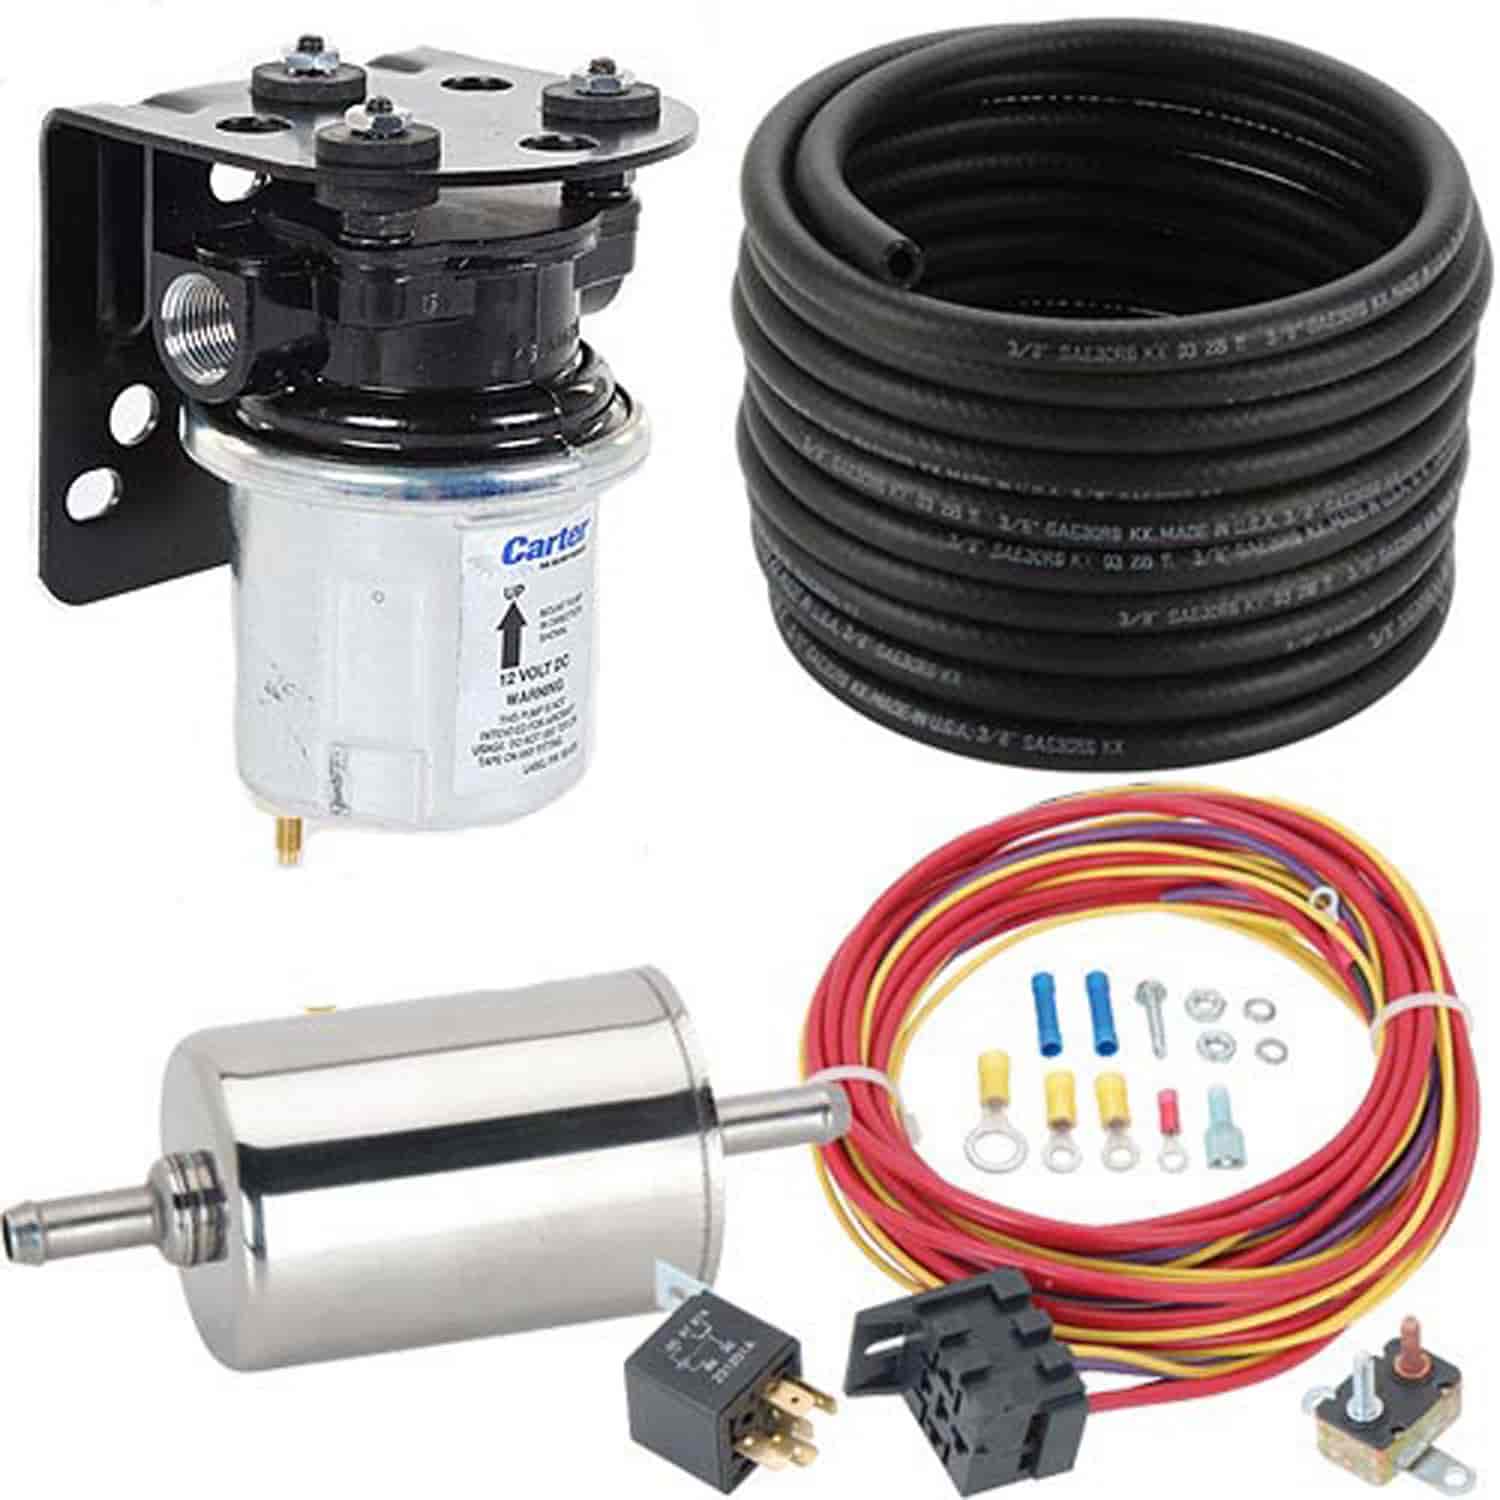 Electric Fuel Pump Kit with 100gph Pump